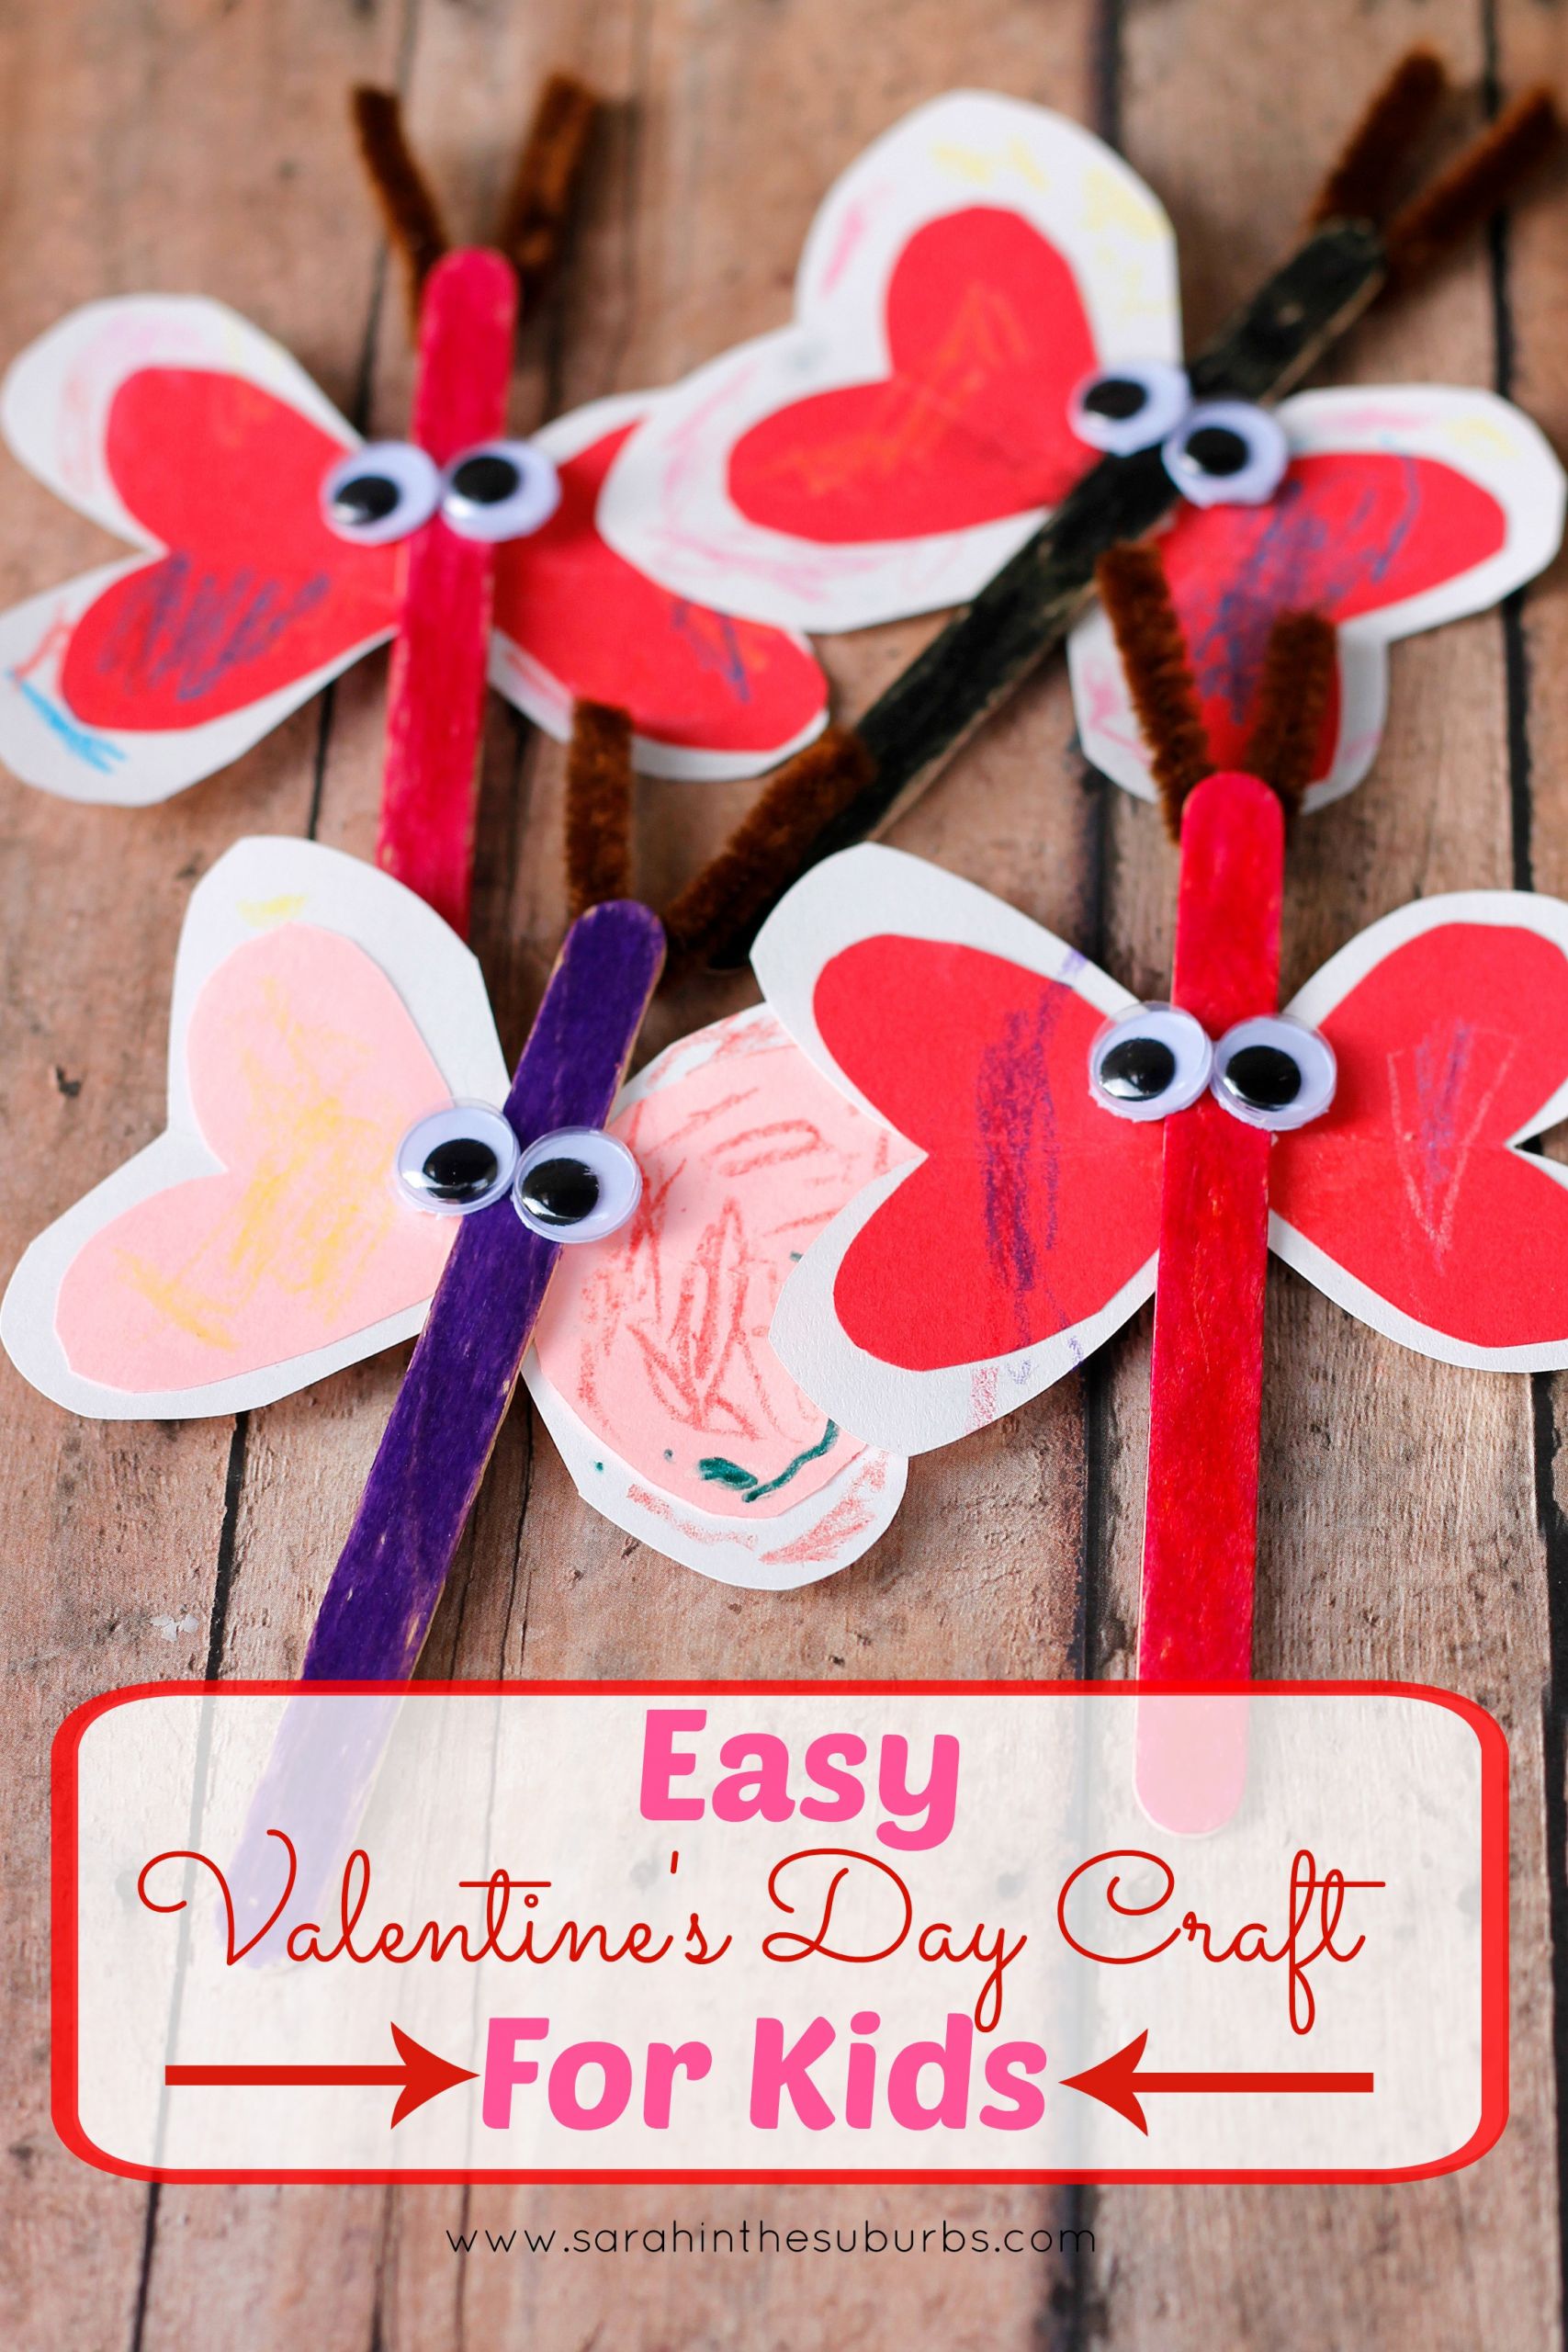 Valentines Kids Craft Ideas
 Love Bug Valentine s Day Craft for Kids Sarah in the Suburbs